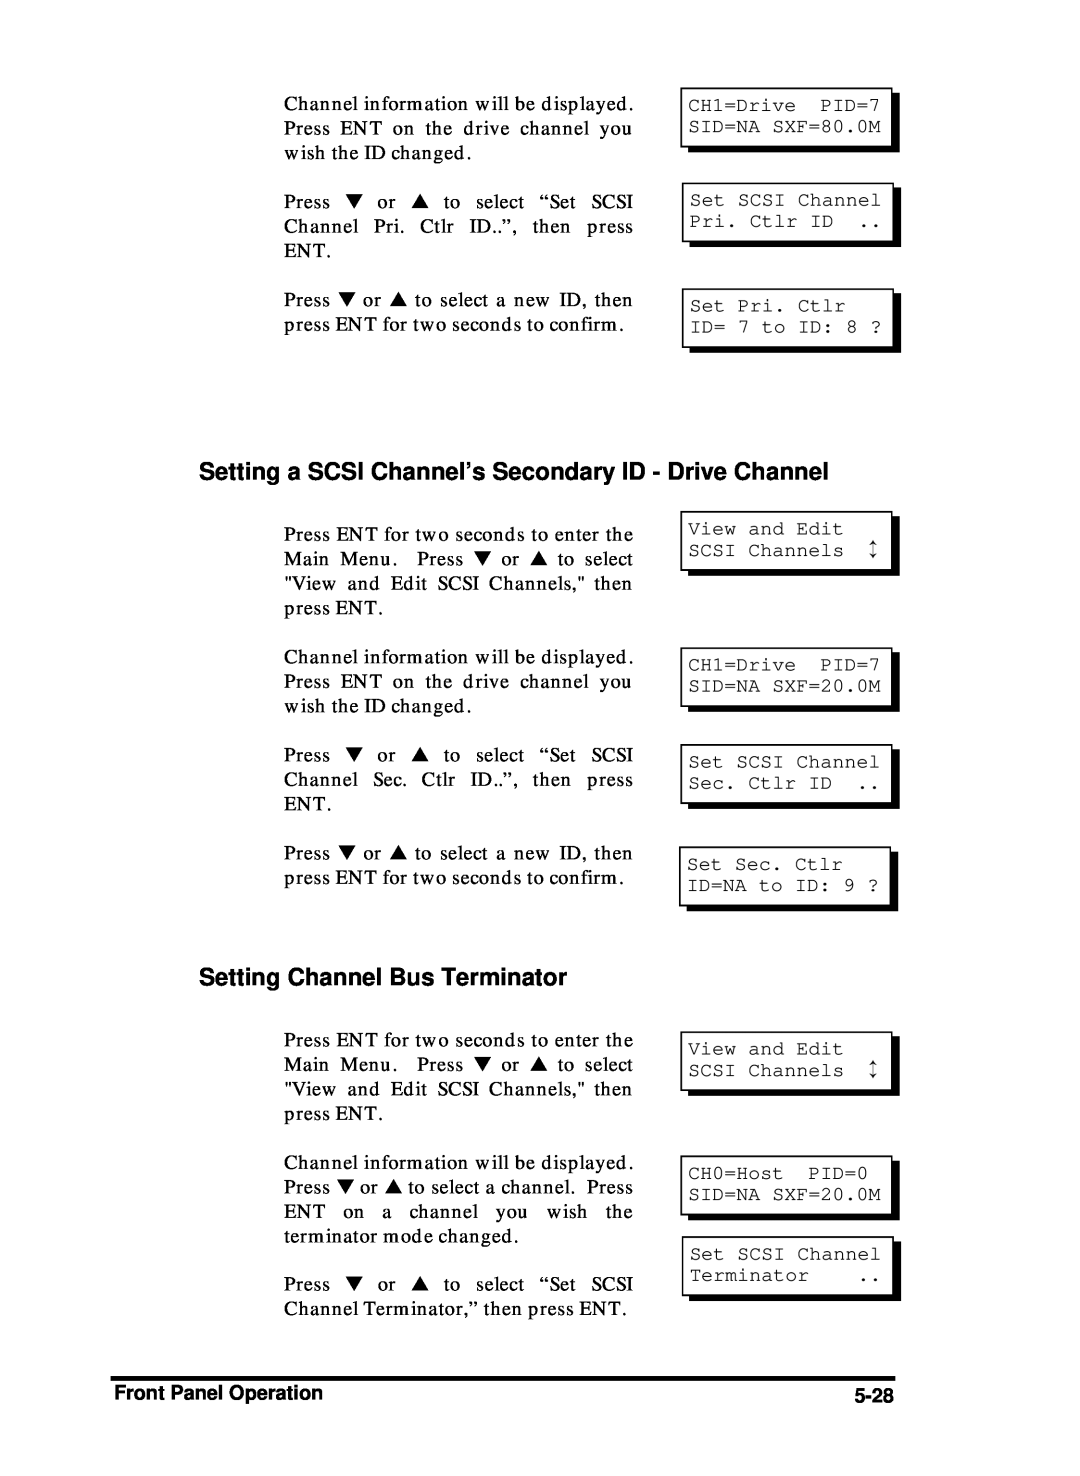 Compaq Infortrend manual Setting a SCSI Channel’s Secondary ID - Drive Channel, Setting Channel Bus Terminator, 5-28 